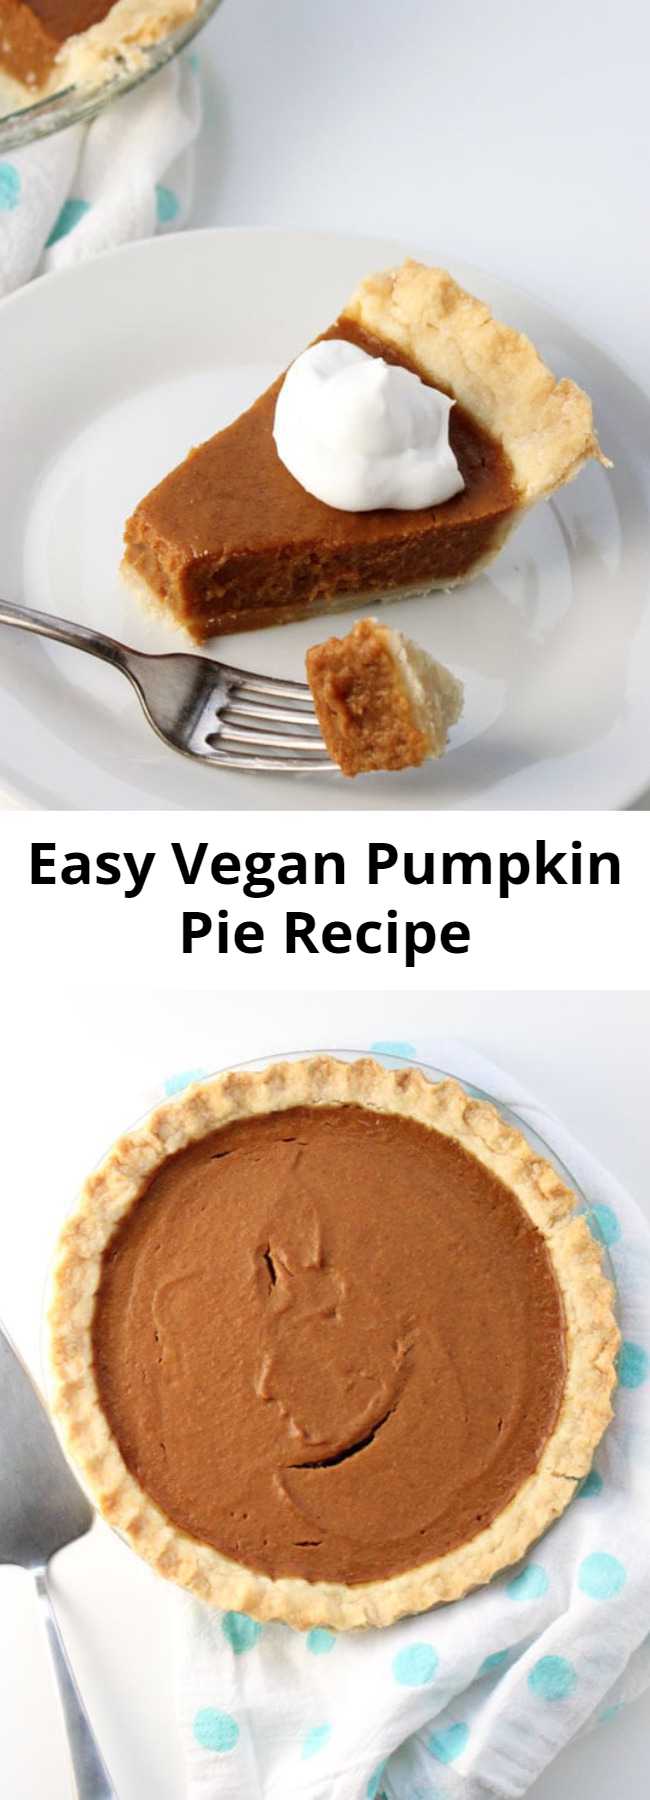 Easy Vegan Pumpkin Pie Recipe - Just 9 easy ingredients, combine in a blender, pour into a pie shell, and bake. Done! Tastes best when made ahead of time making it a stress-free Thanksgiving dessert. The BEST go-to vegan pumpkin pie recipe ever.